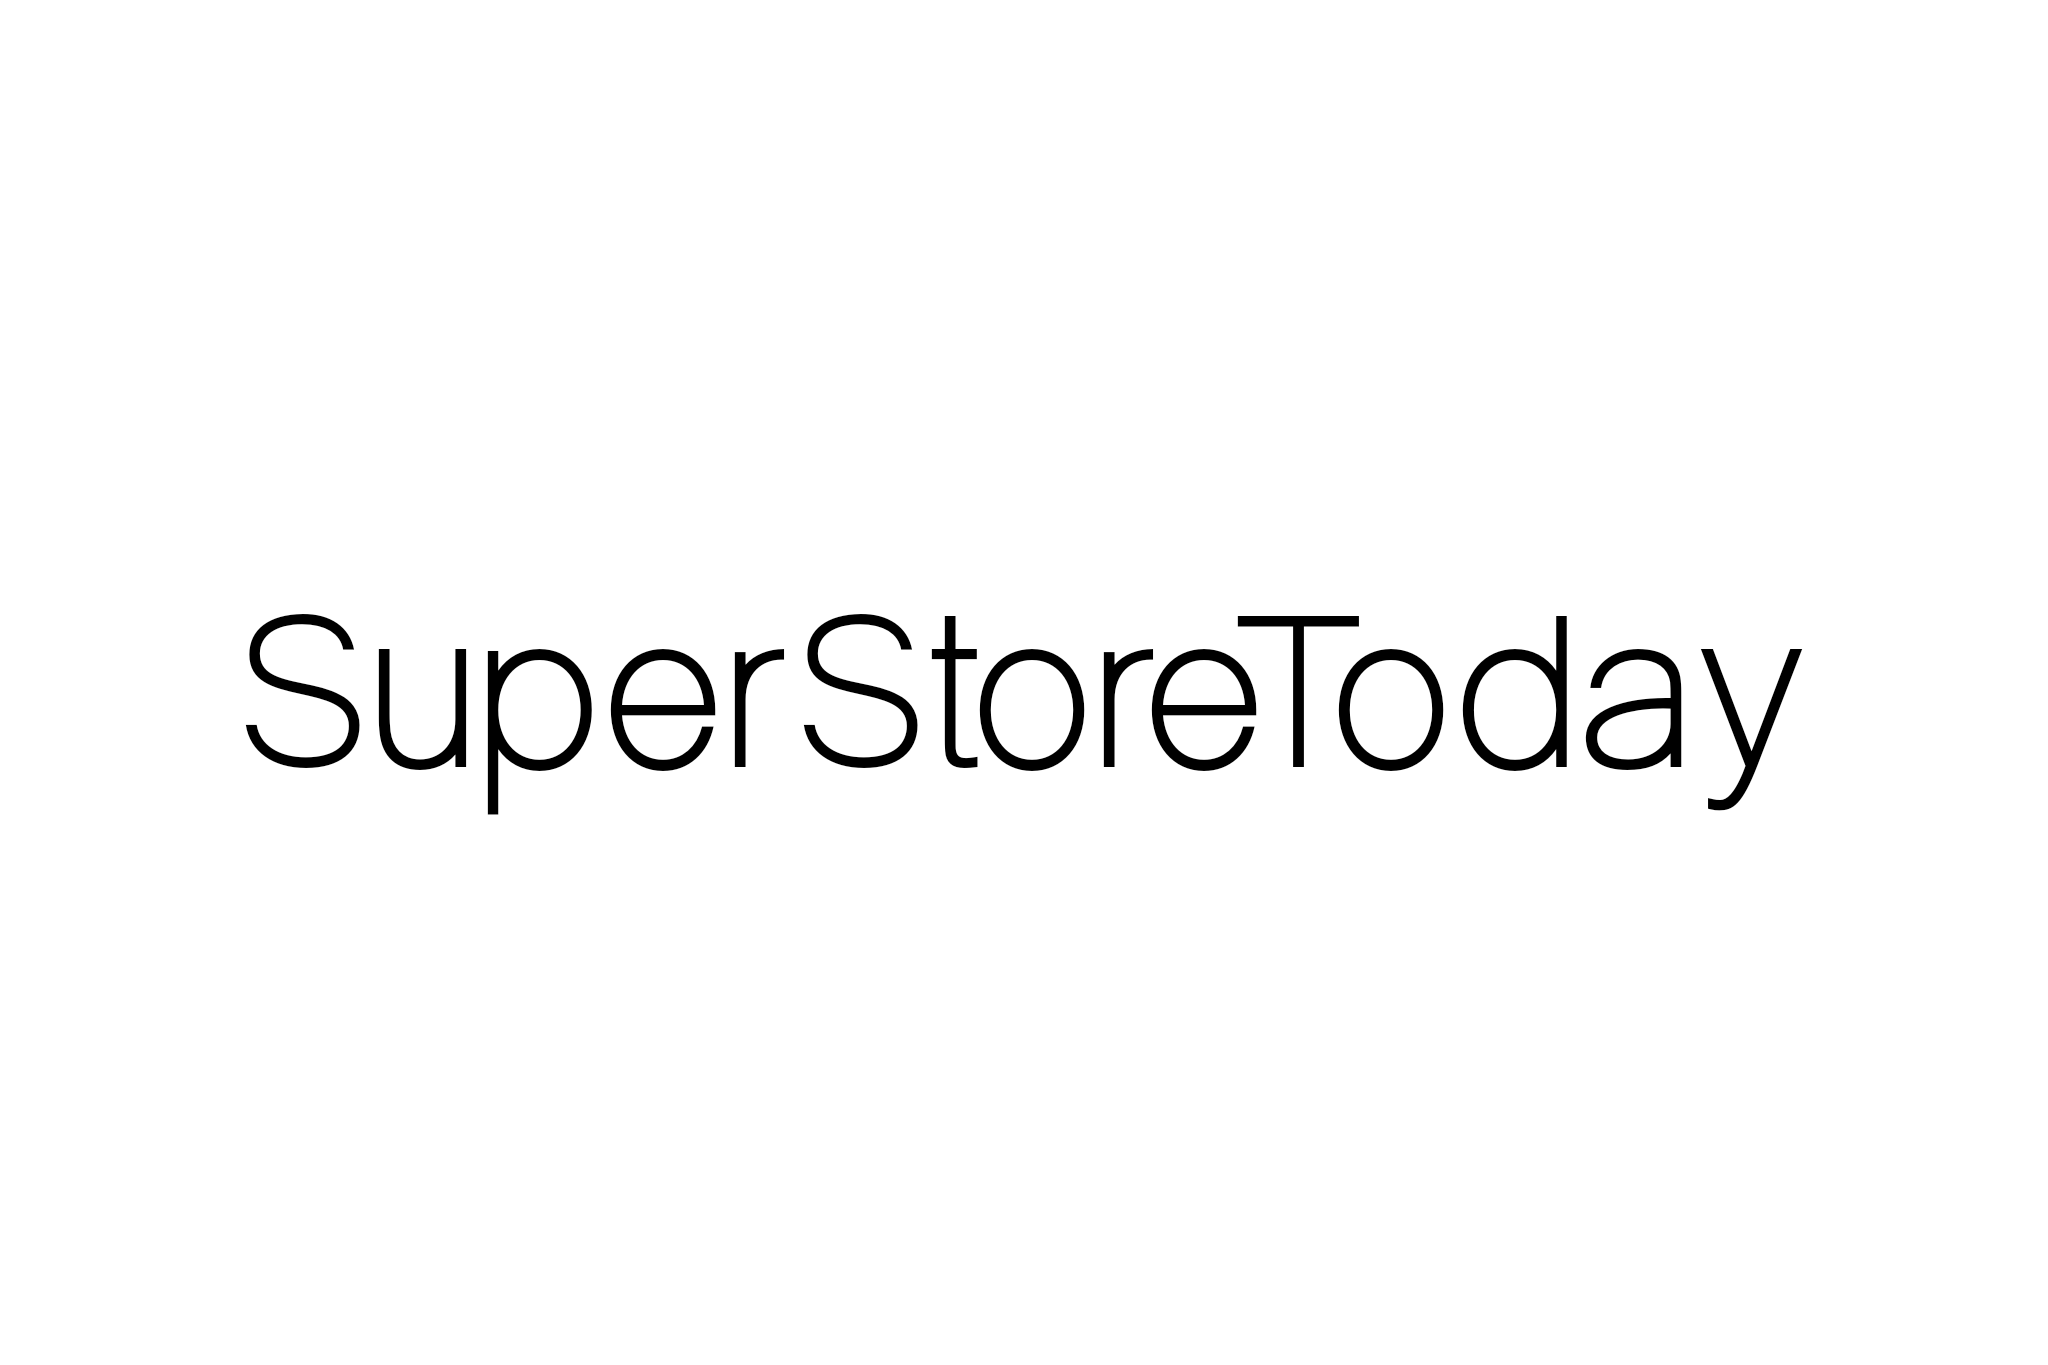 Super Store Today